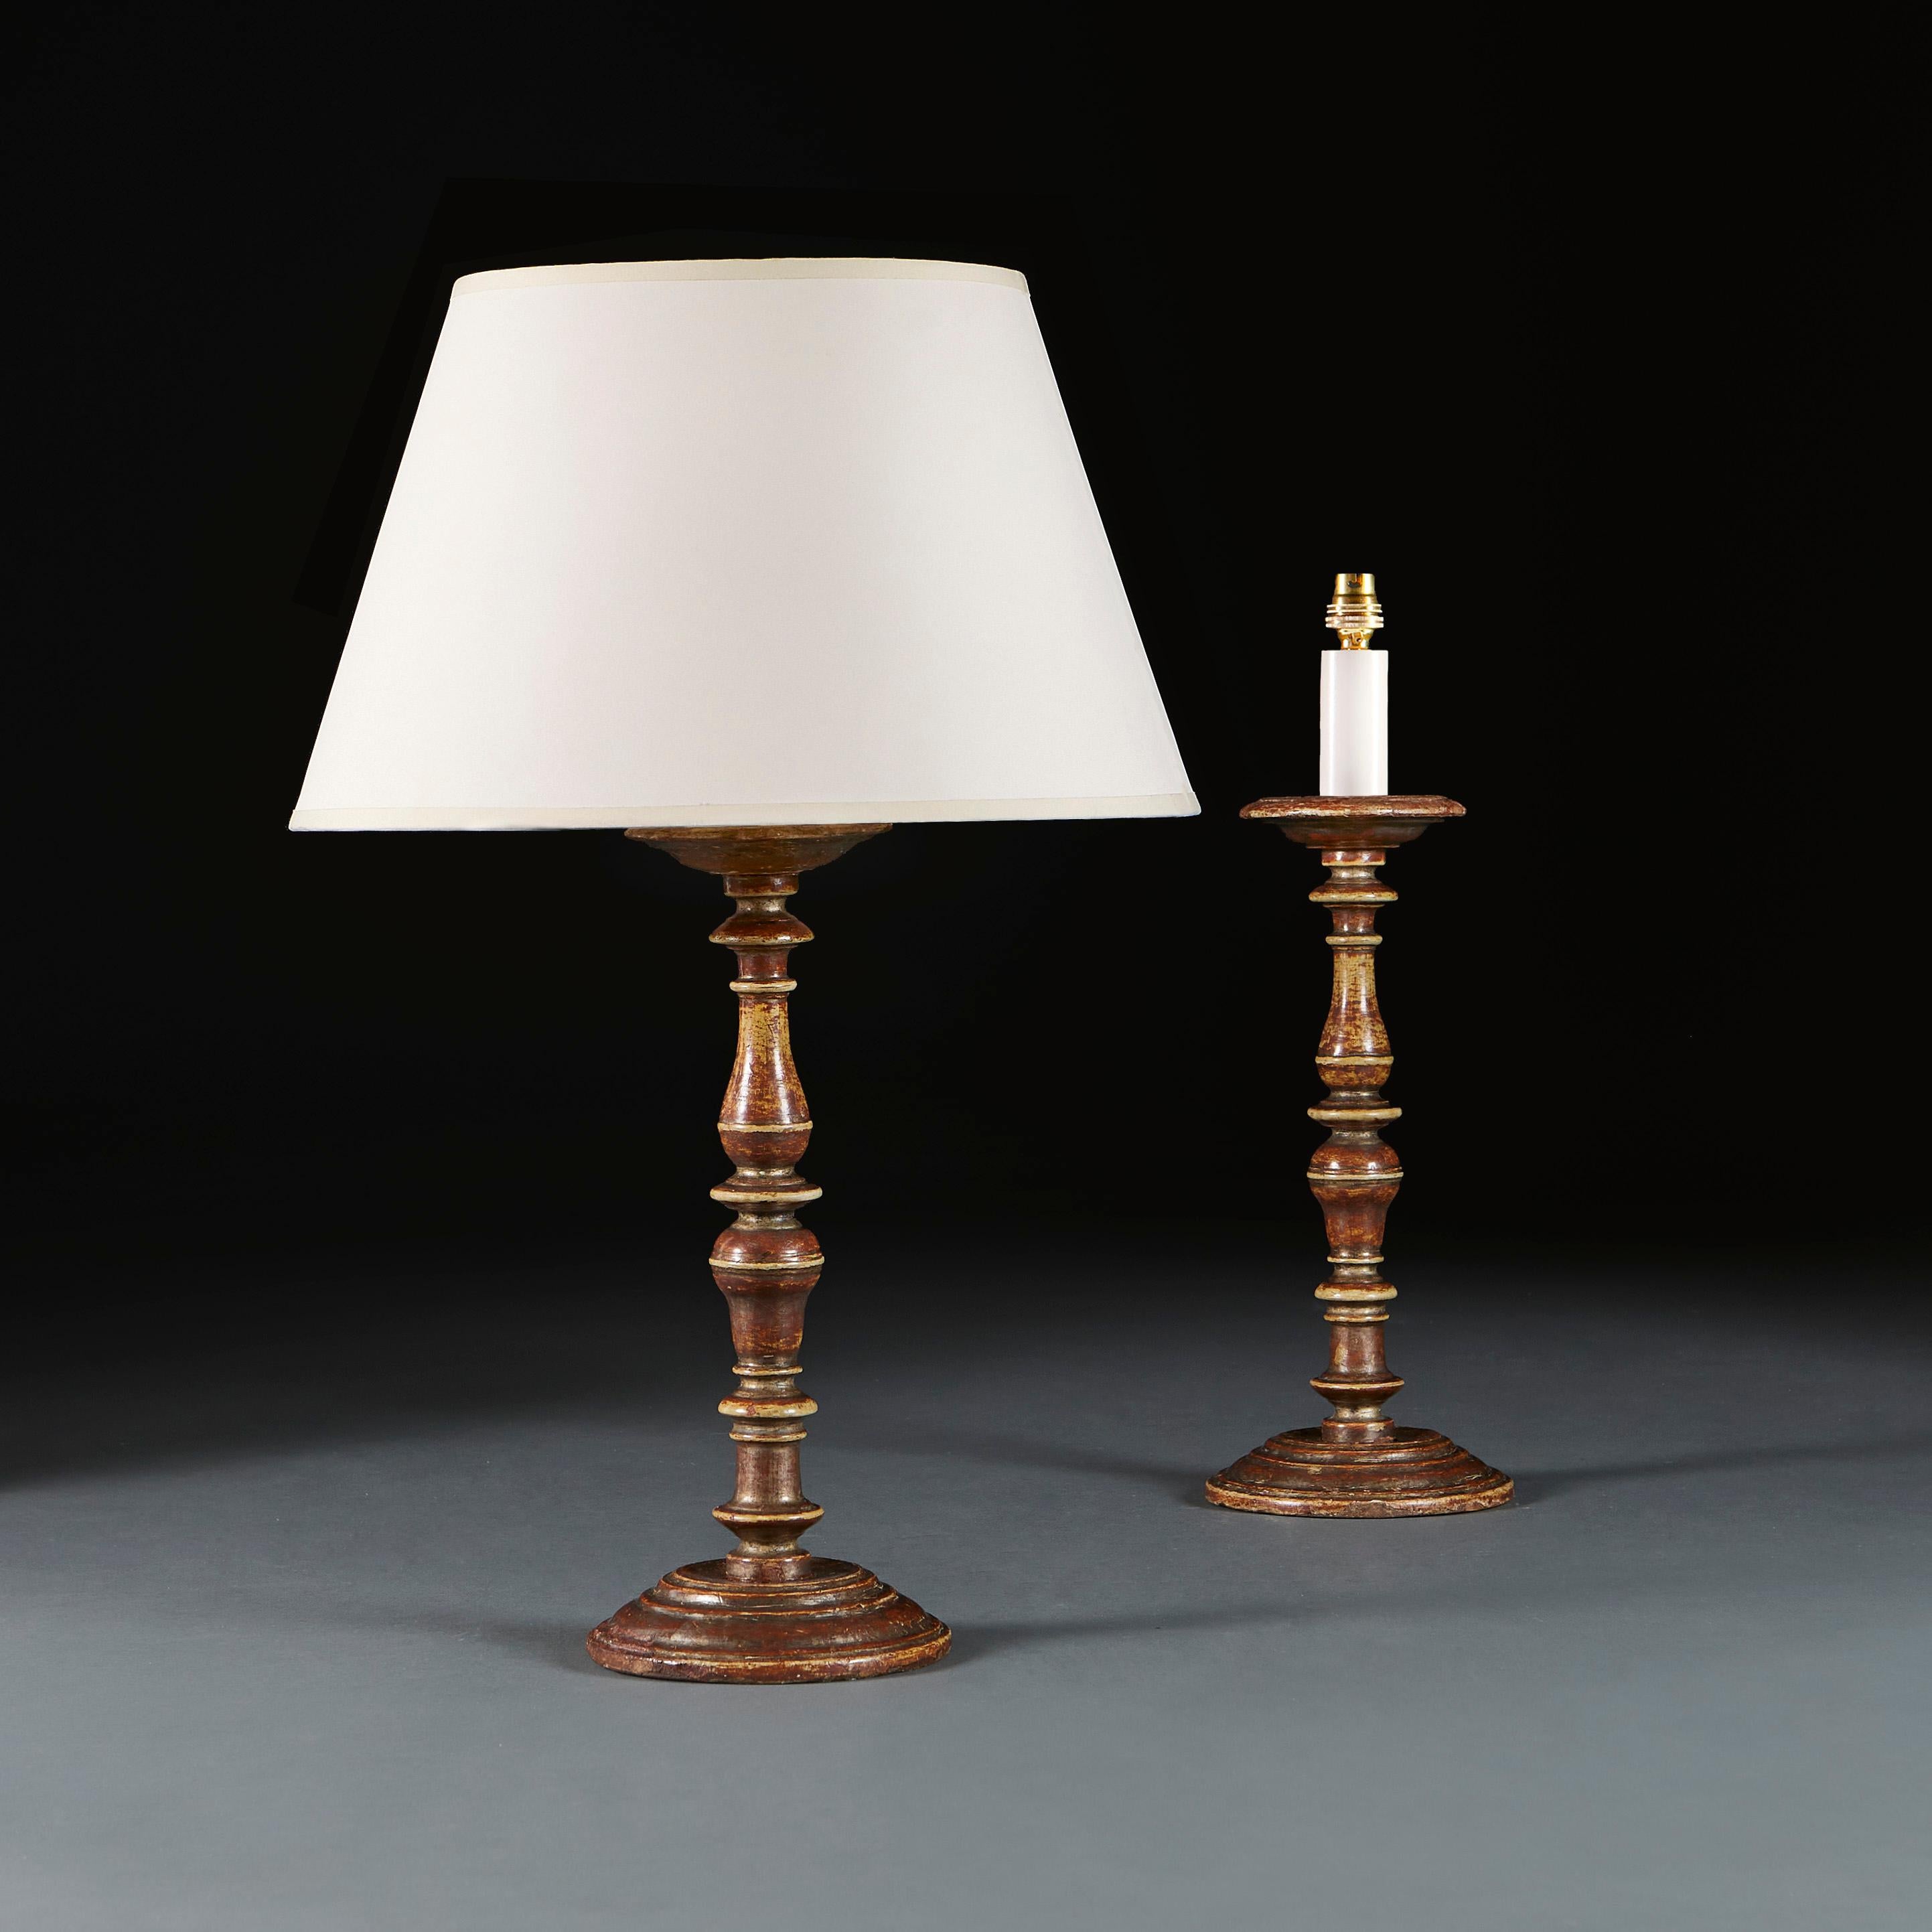 Italy, circa 1800

A fine pair of early nineteenth century turned candlesticks, with silver gilt surface, now worn through to reveal the red bouille beneath, now electrified as lamps.

Height 38.00cm
Height with shade 63.00cm
Diameter of base